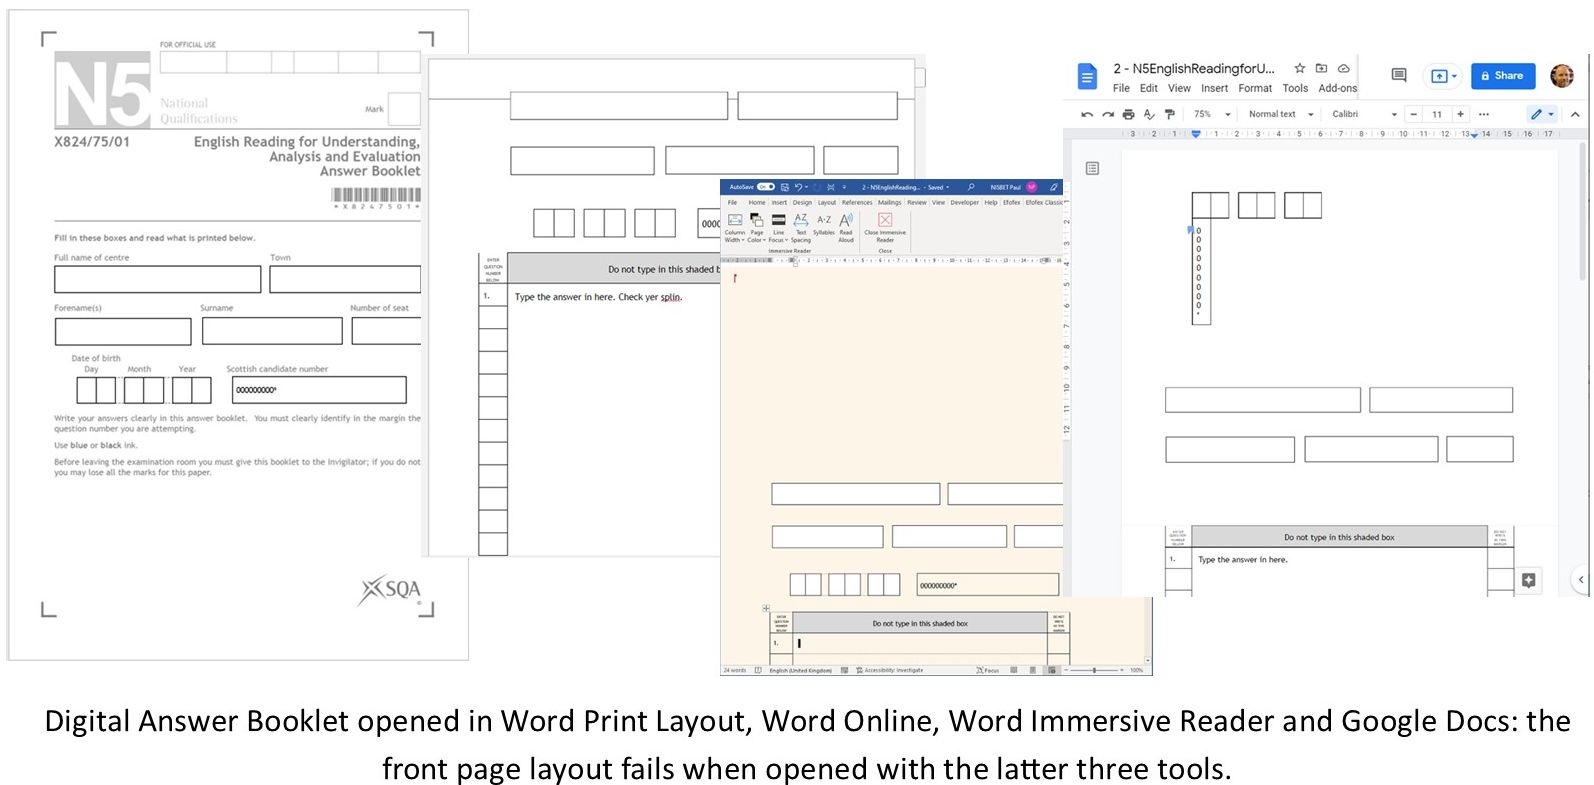 Screen shots showing a digital answer box opened in Word Print Layout and how the front page layout fails when opened in Word Online, Immersive reader and Google Docsr